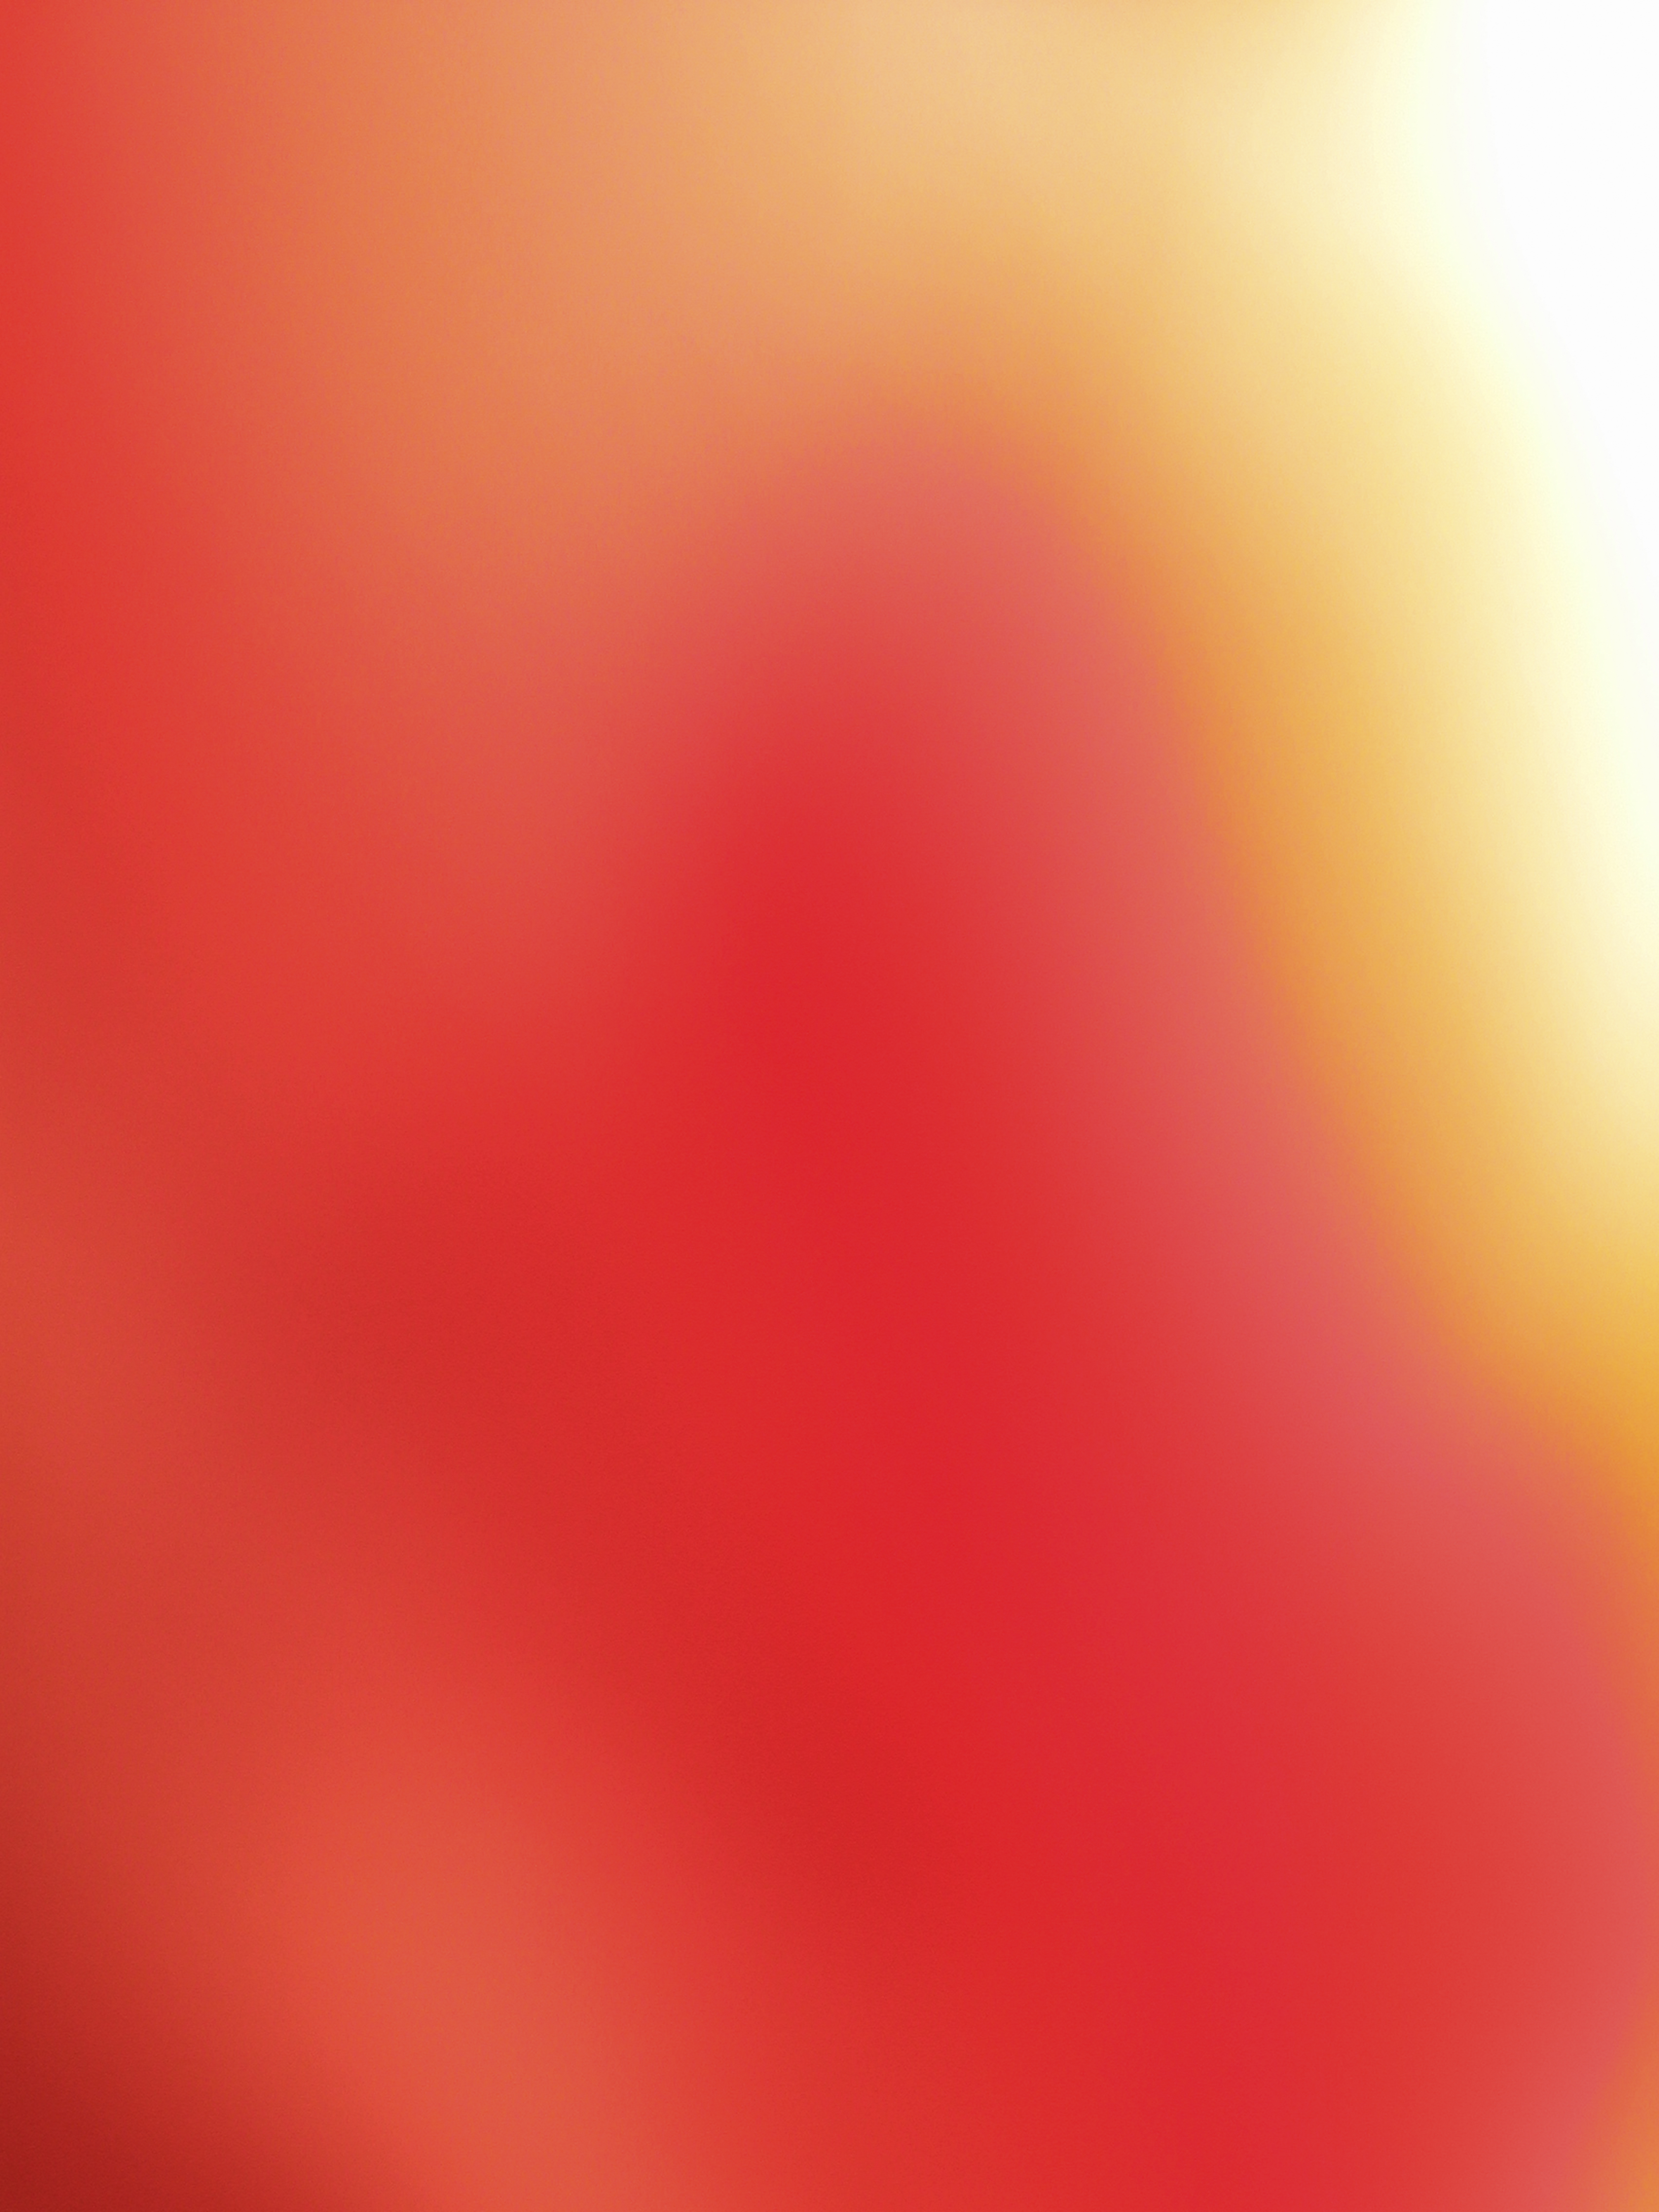 156045 download wallpaper gradient, abstract, yellow, red screensavers and pictures for free